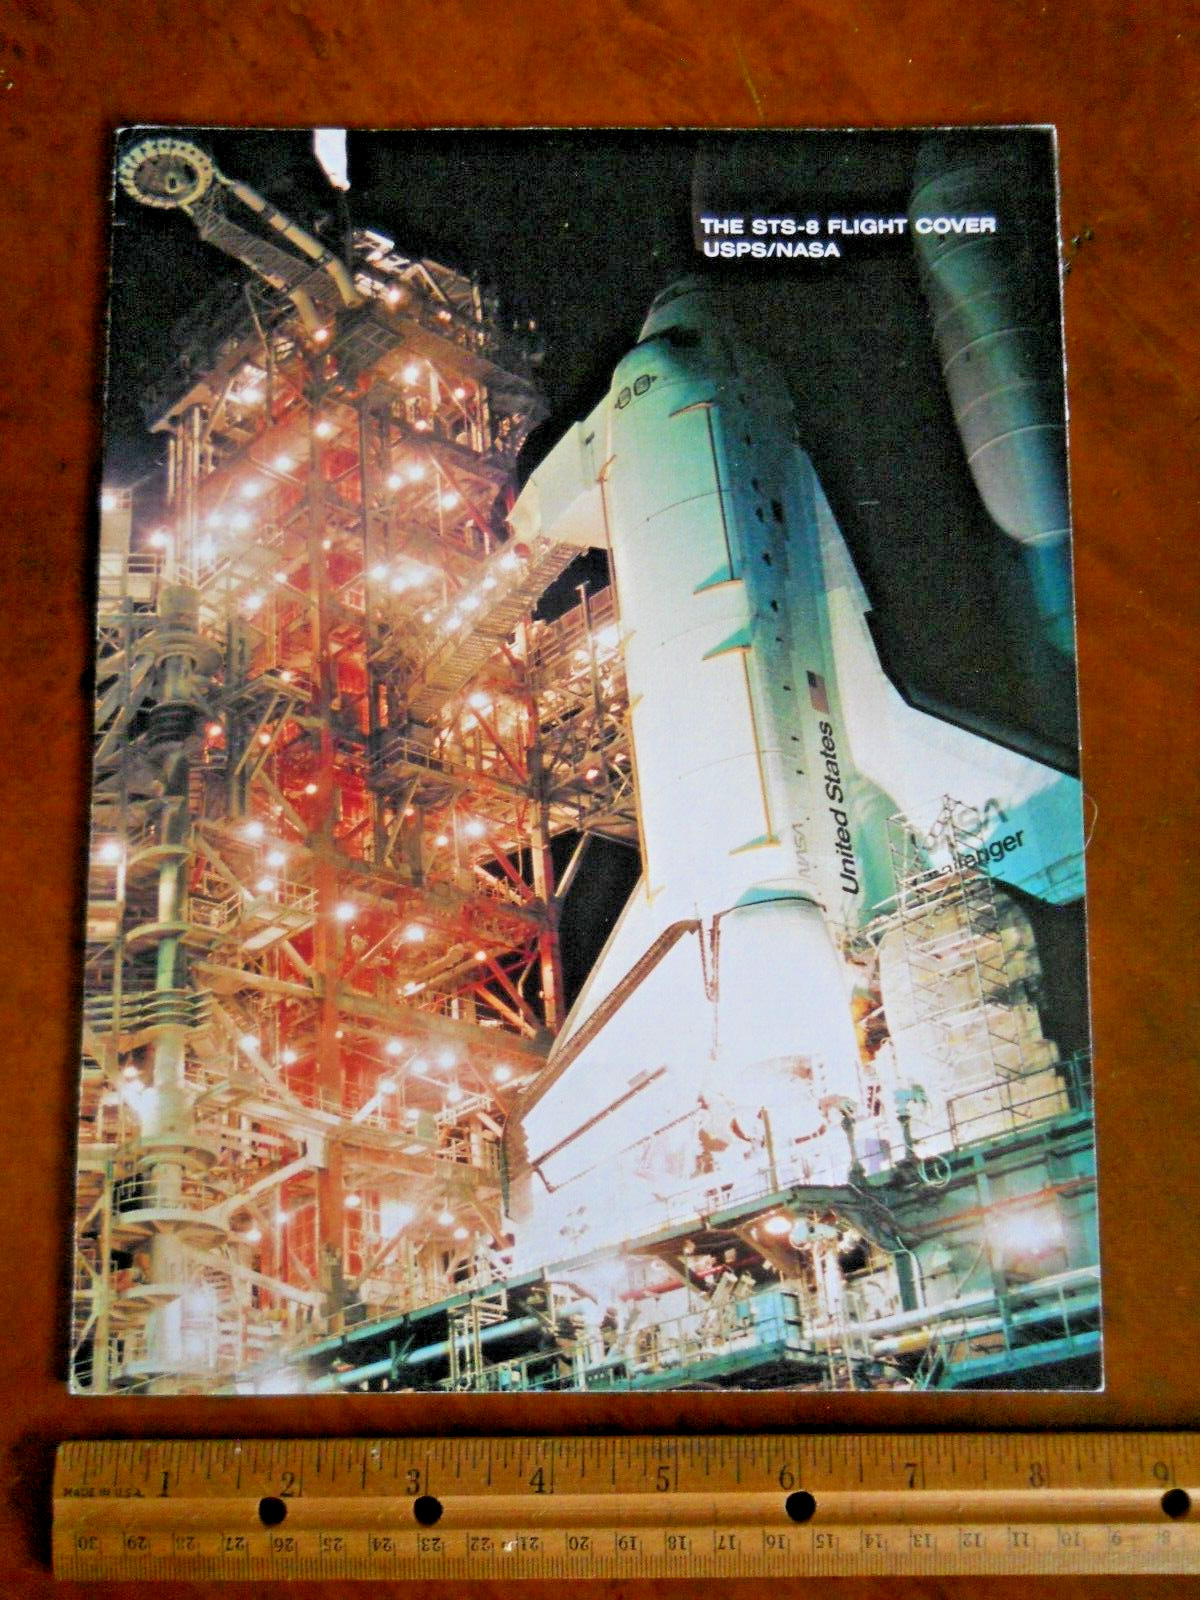 USPS/NASA STS-8 FLIGHT COVER BOOKLET (USED IN VERY GOOD CONDITION)